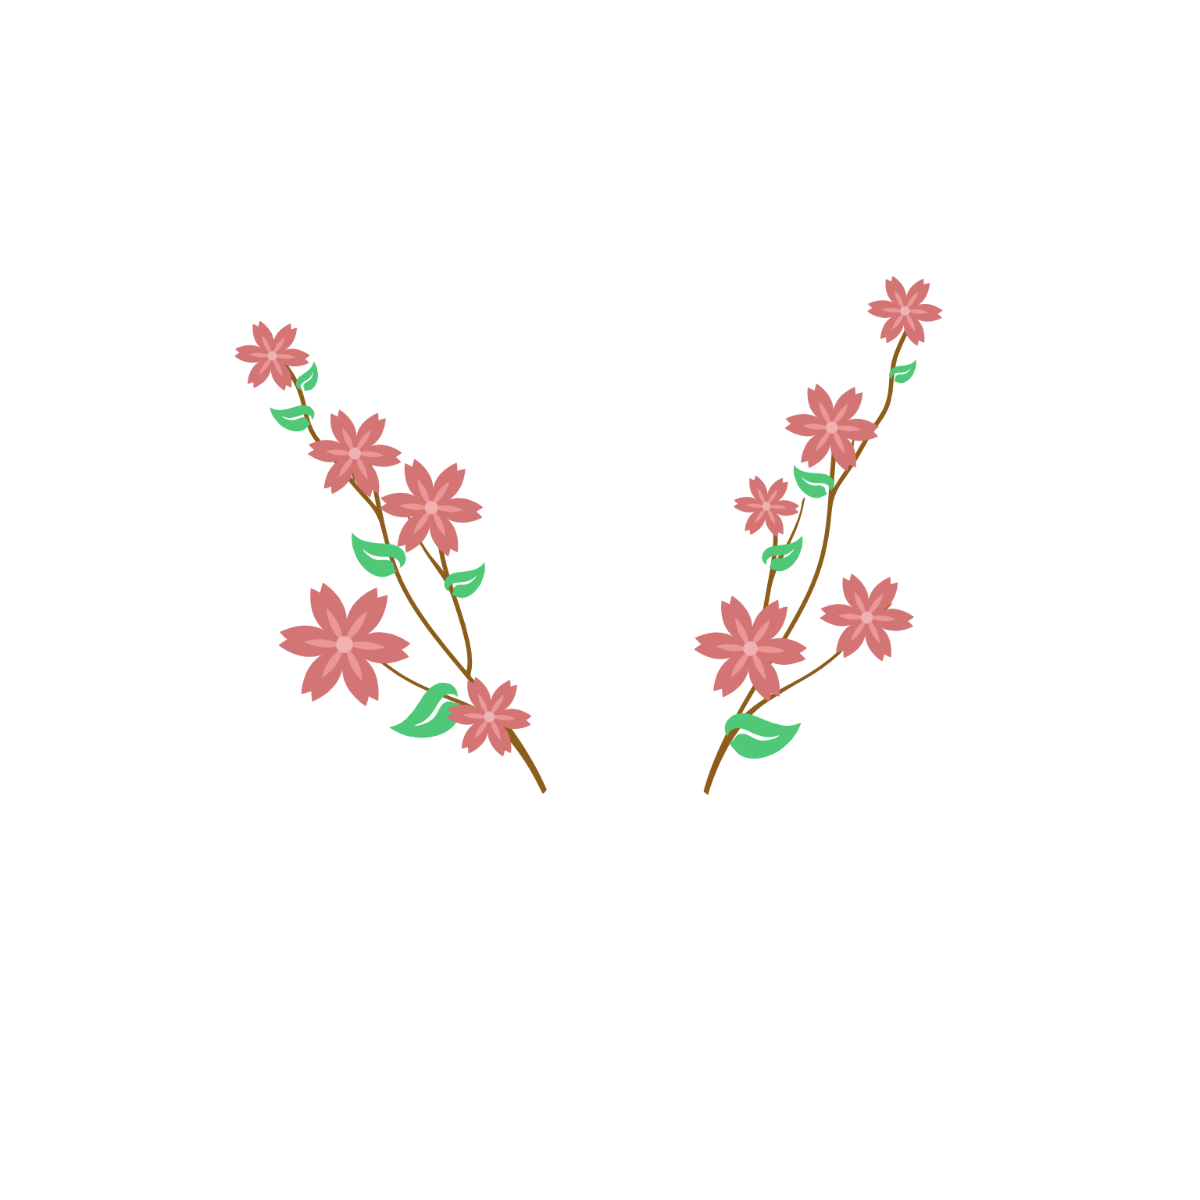 Floral Branch Clipart Template